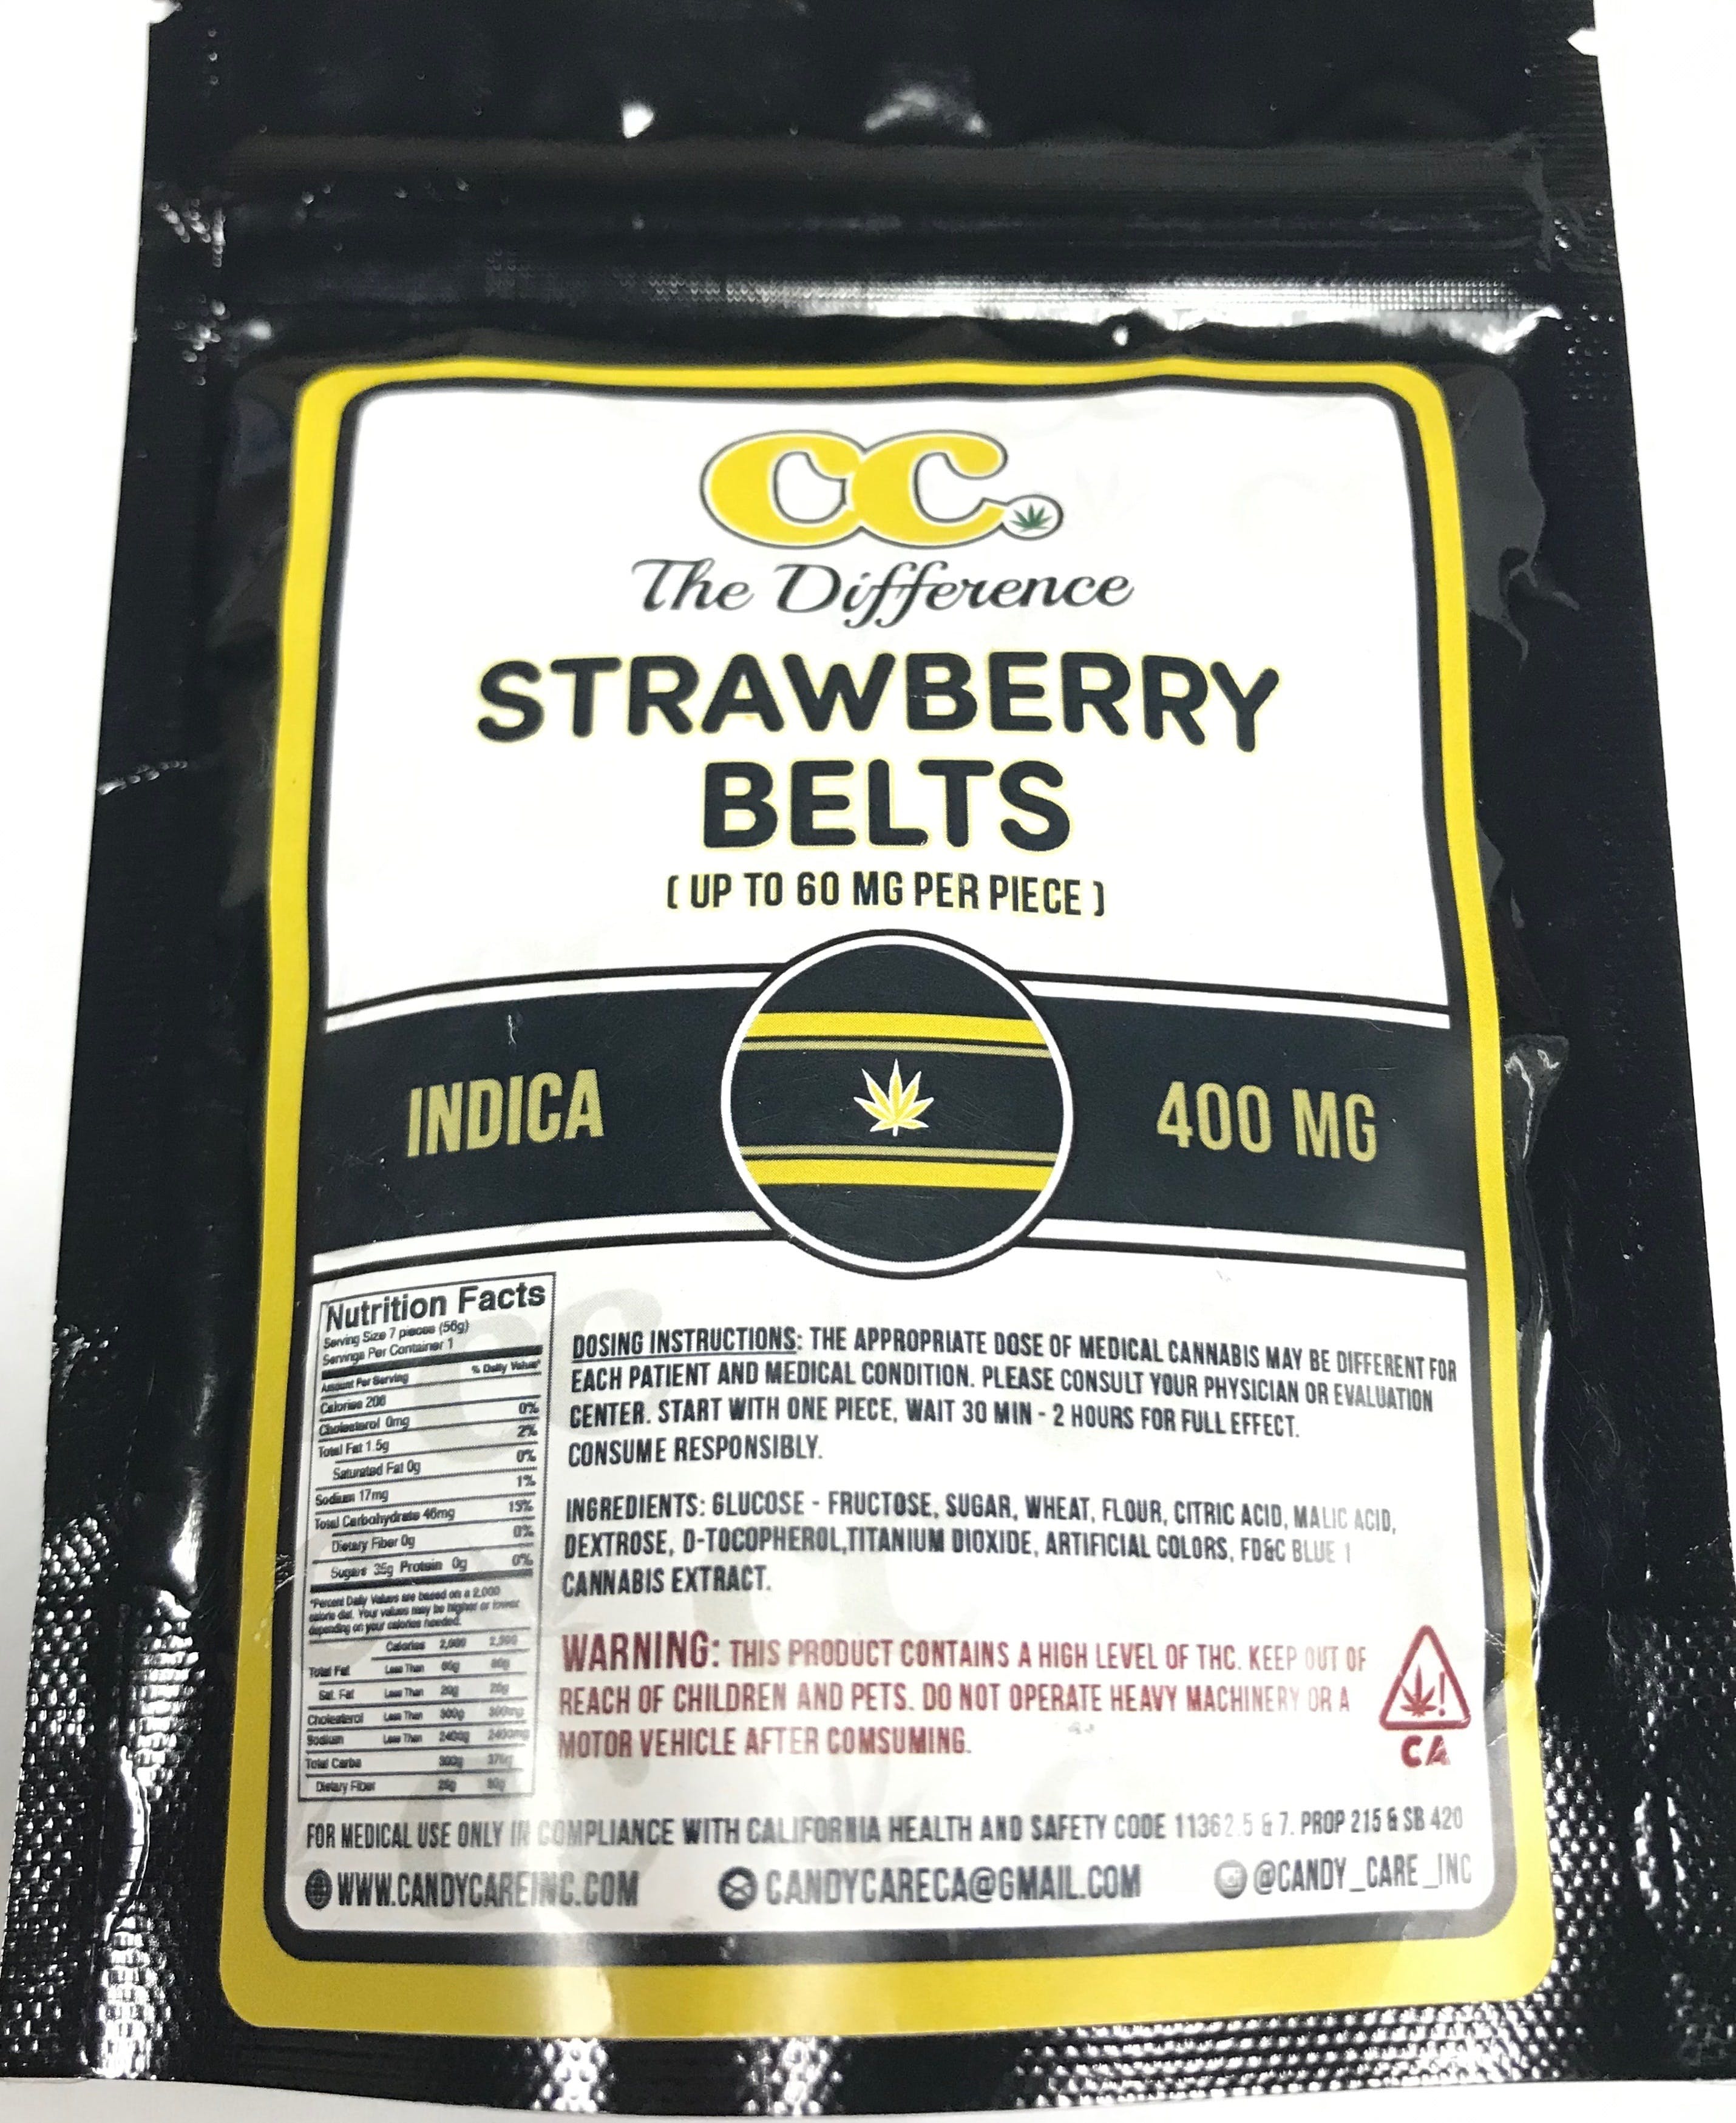 edible-candy-care-400mg-indica-strawberry-belts